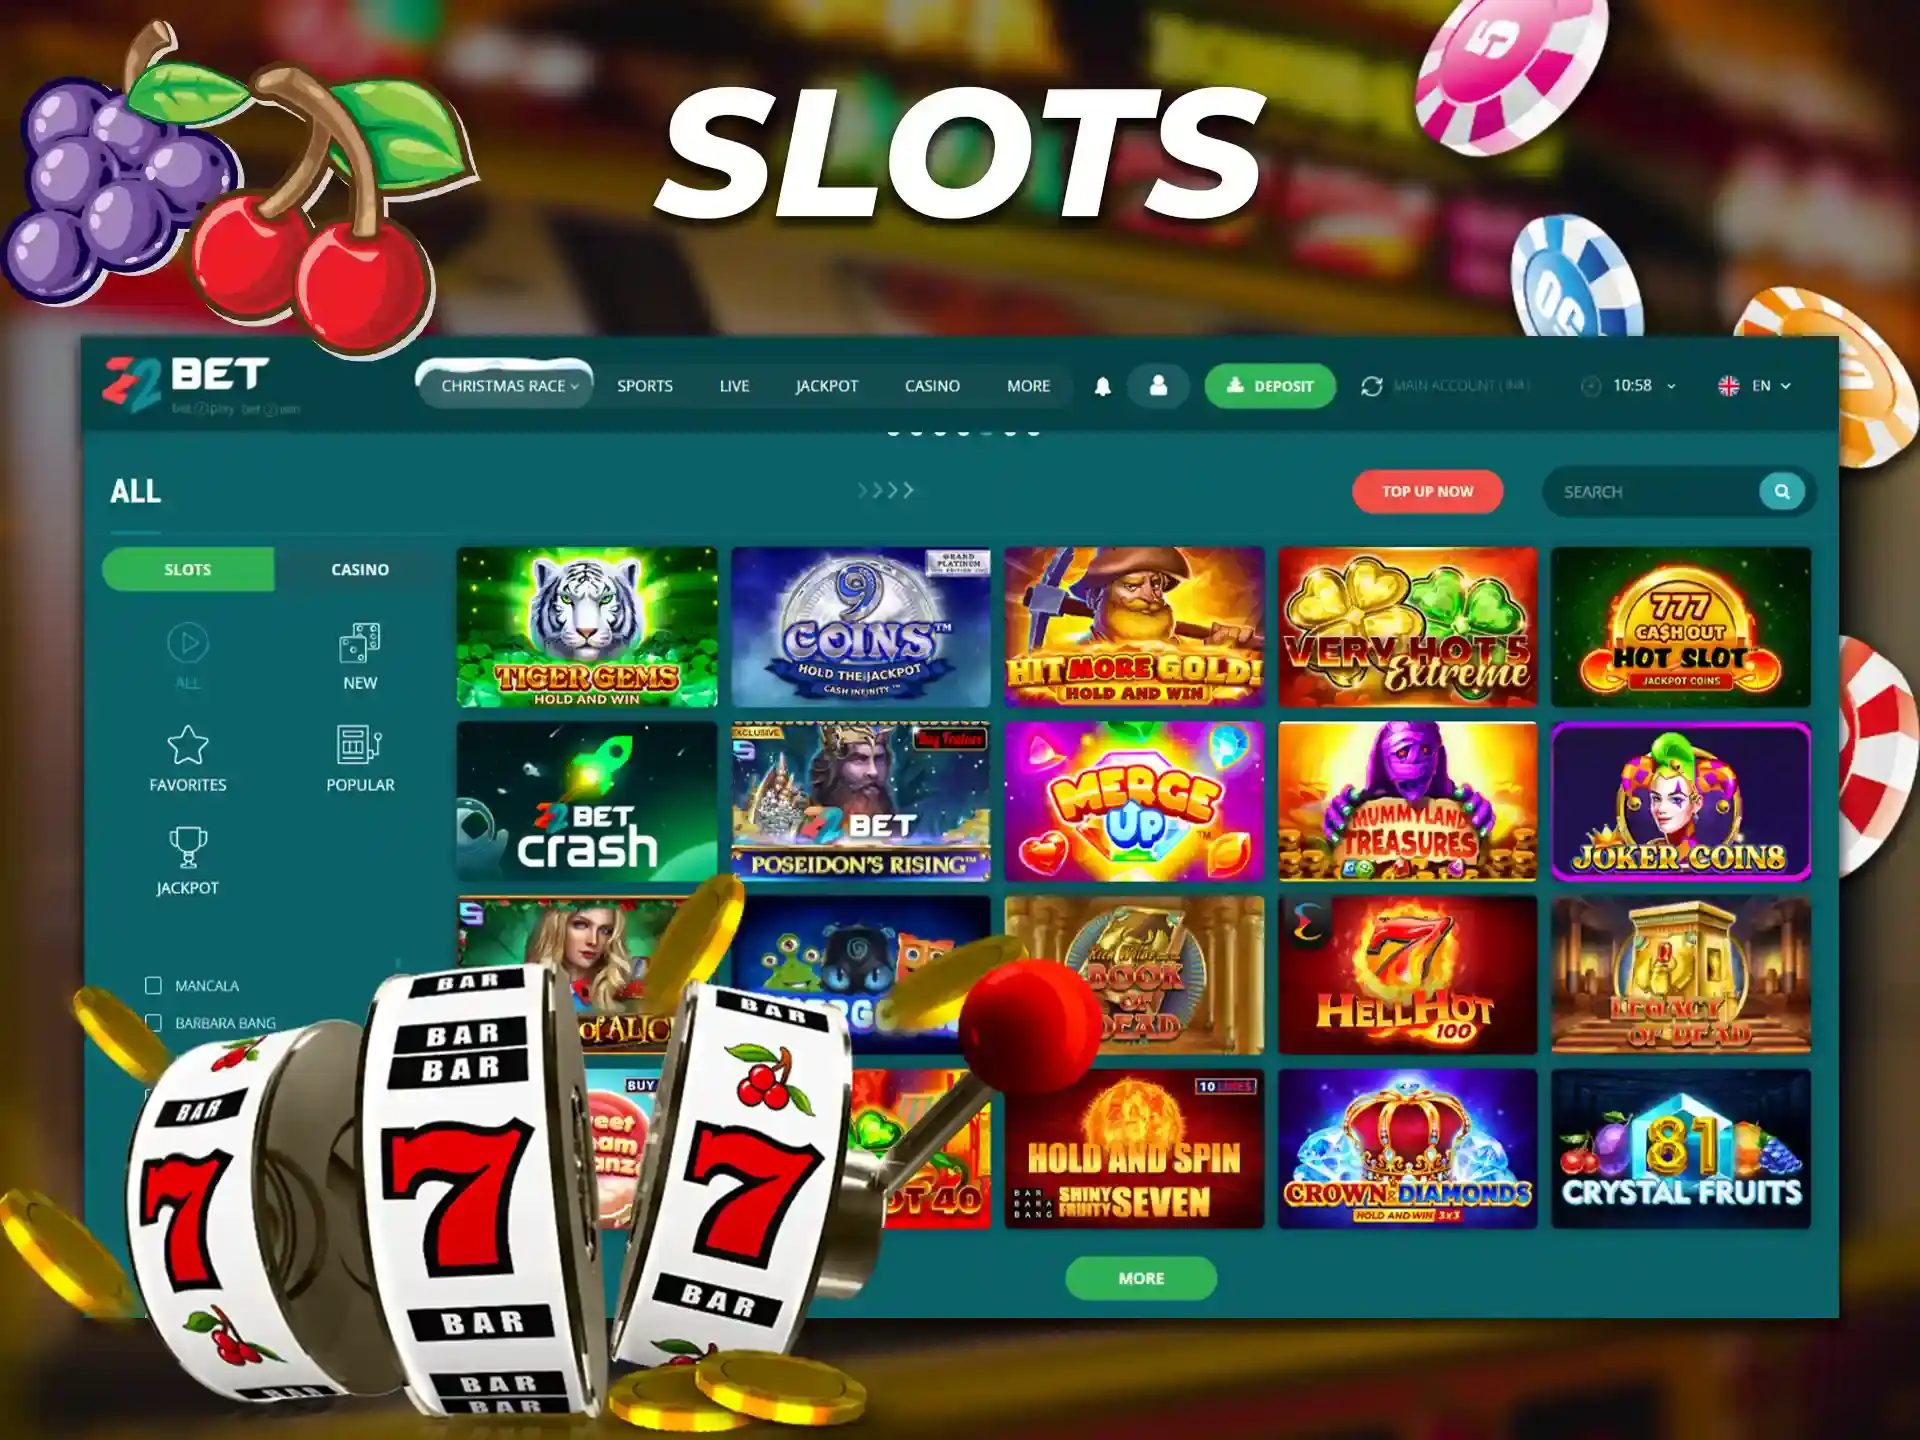 A large number of slot machines at 22Bet on the 22Bet website.